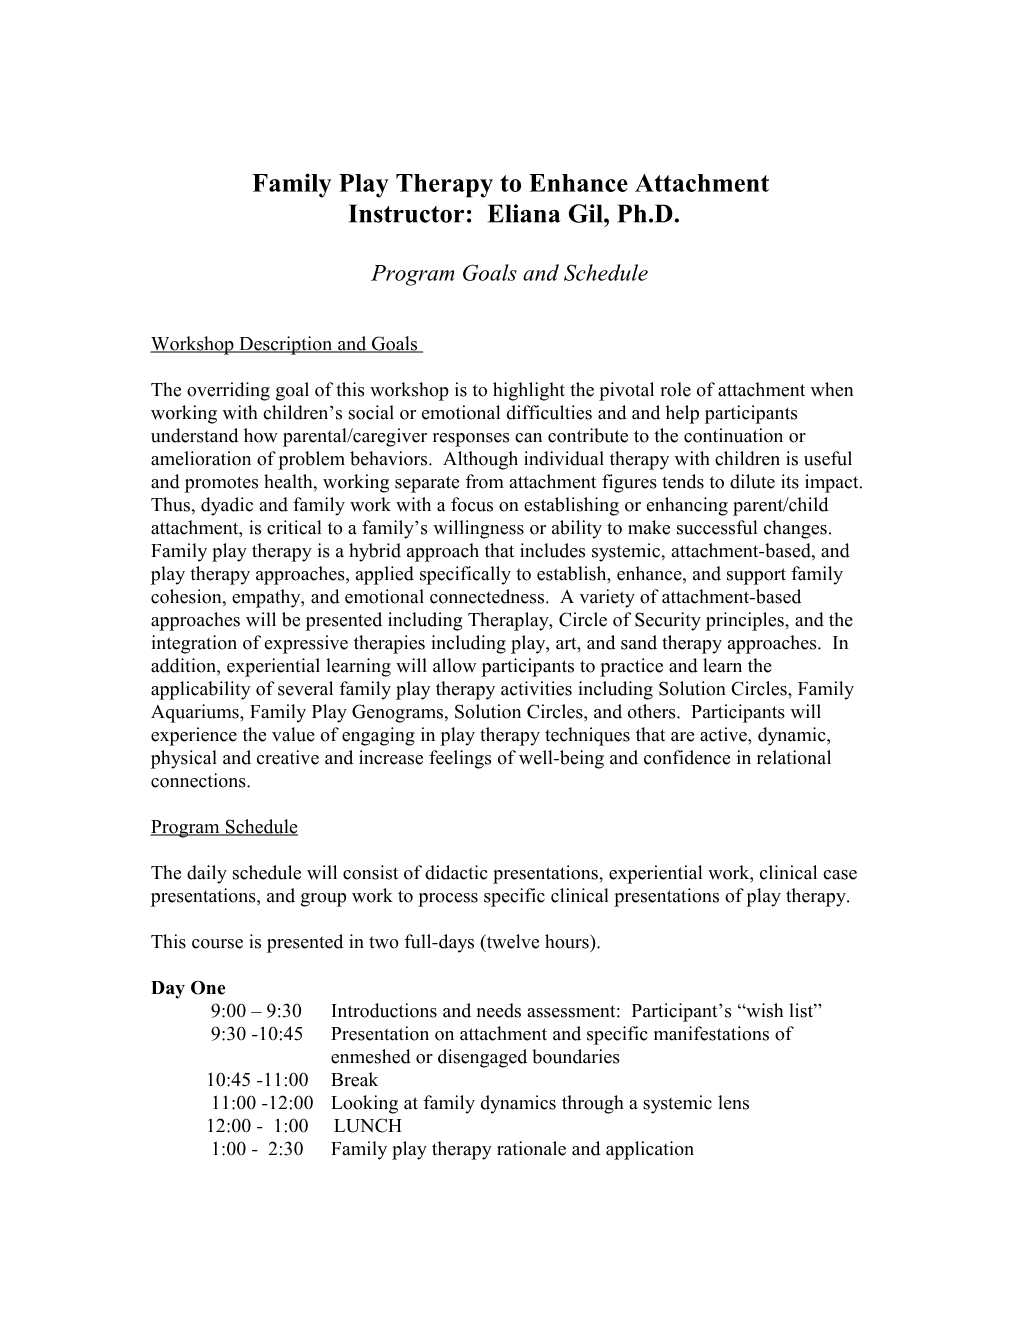 Family Play Therapy to Enhance Attachment